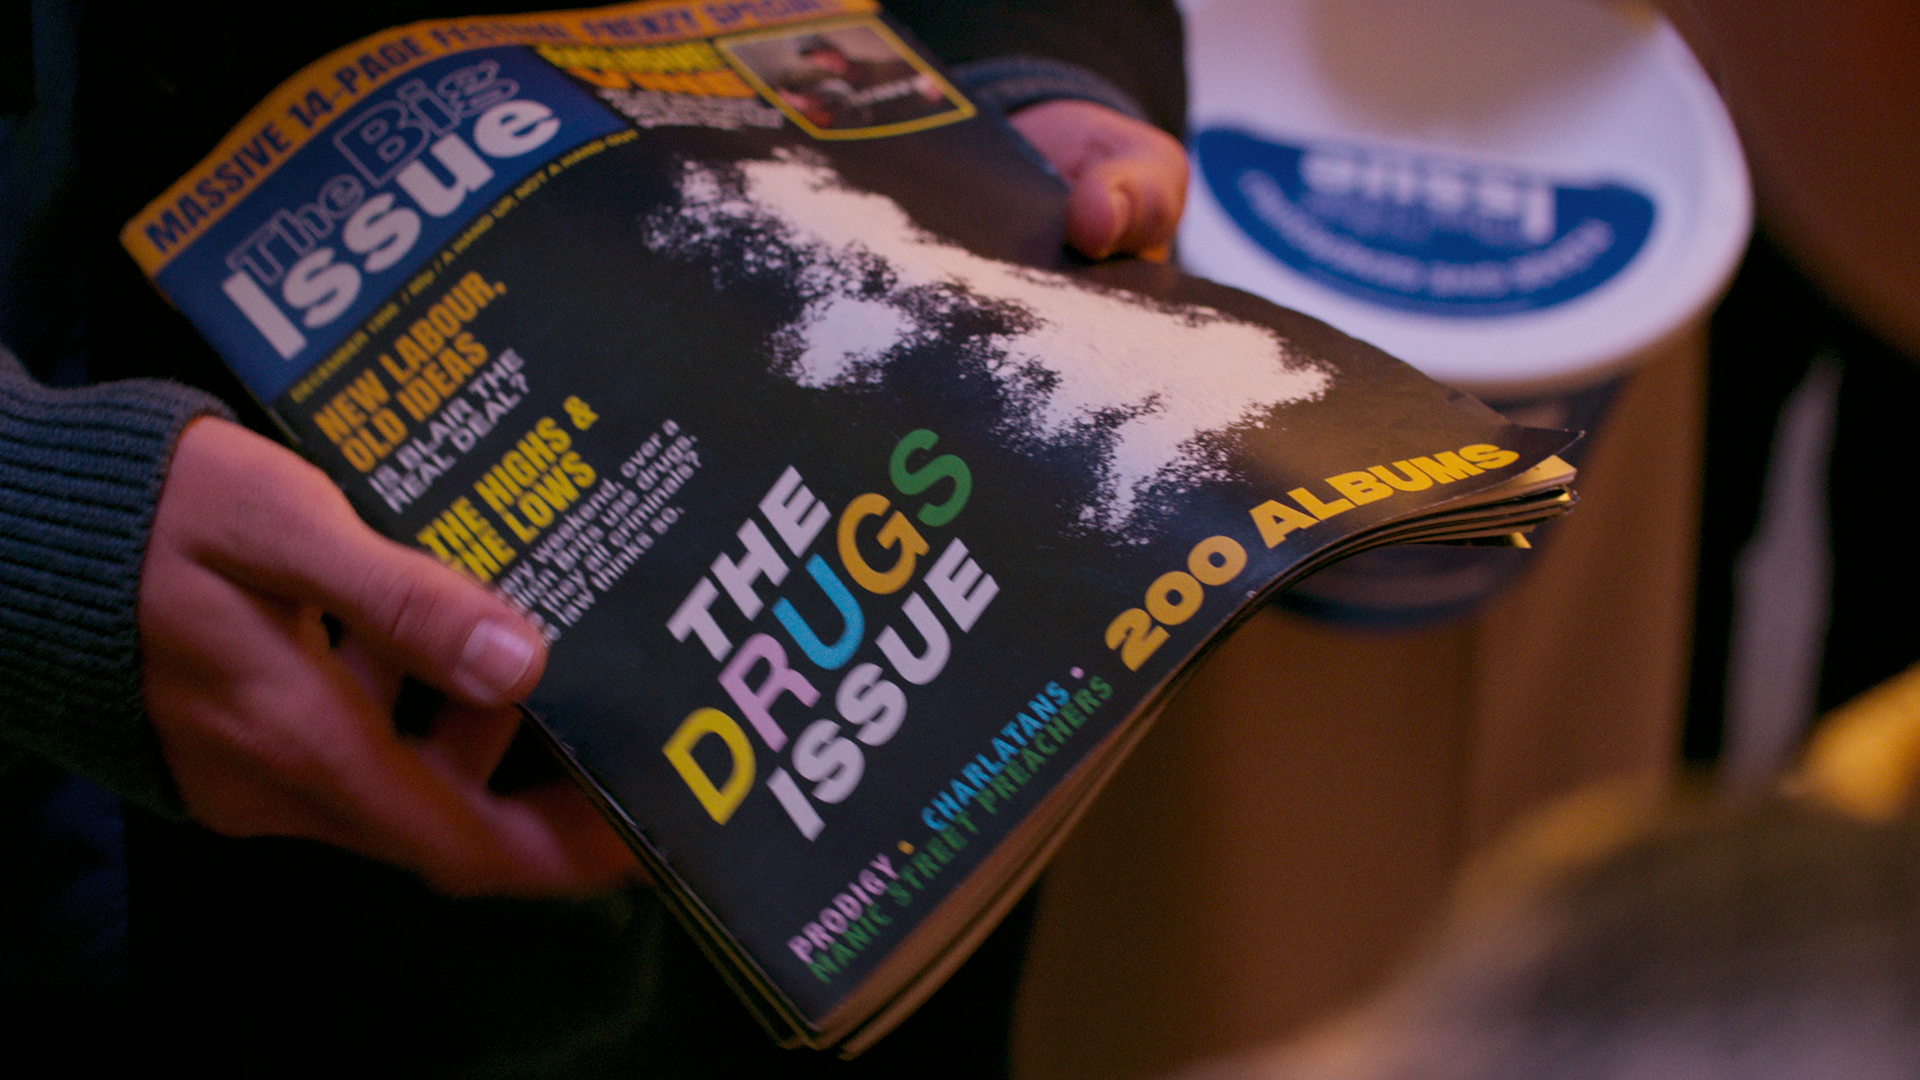 The Big Issue magazine created for The Crown's final series